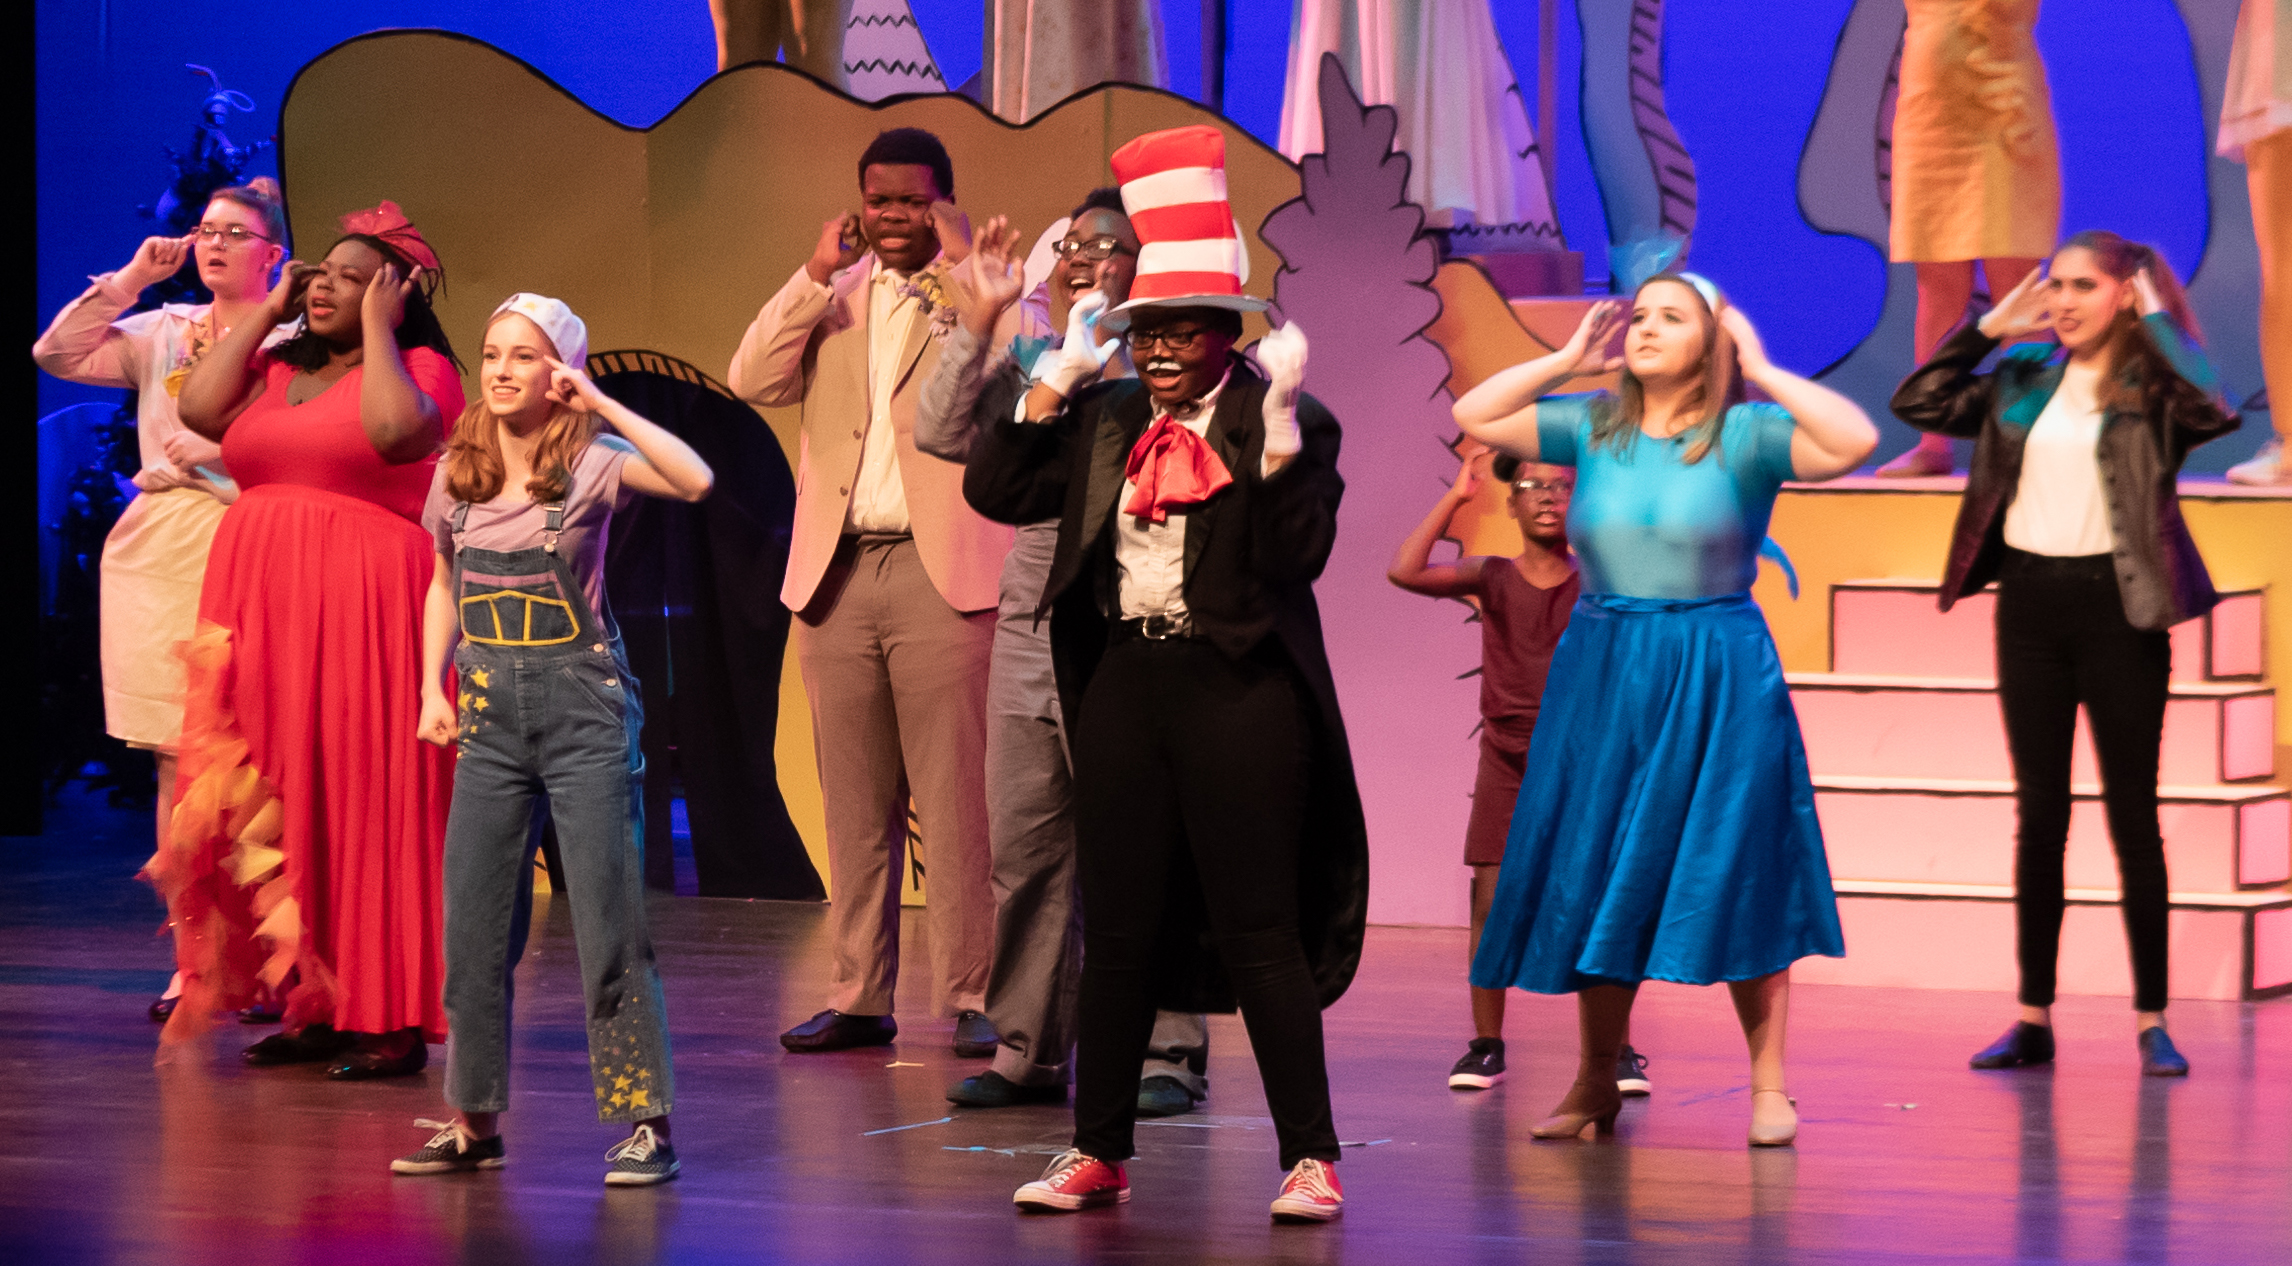 Dreher High School theater class’s production of Seussical included cast members Camryn Dildine, Sydney Largent, ZuZu Maltarich, Willie Allen, Demarcus Williams, Je’Taime Goldwire, Angel Cantlow, Ellie Thomson, and Arden Riley.